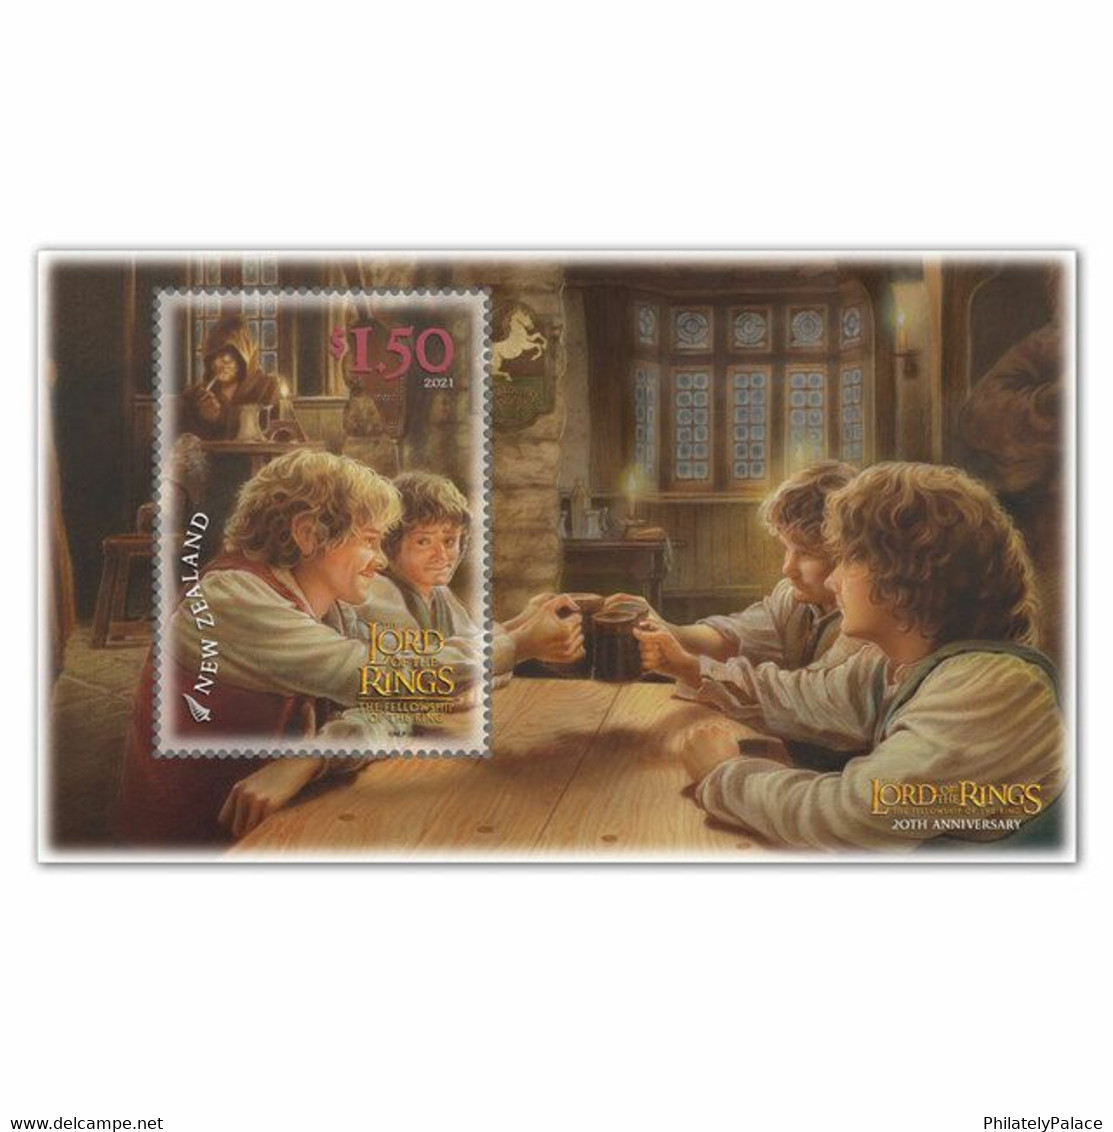 2021 NEW *** New Zealand The Lord of the Rings: The Fellowship of the Ring 20th Anniversary LOTR Set of Mint 6v MNH (**)